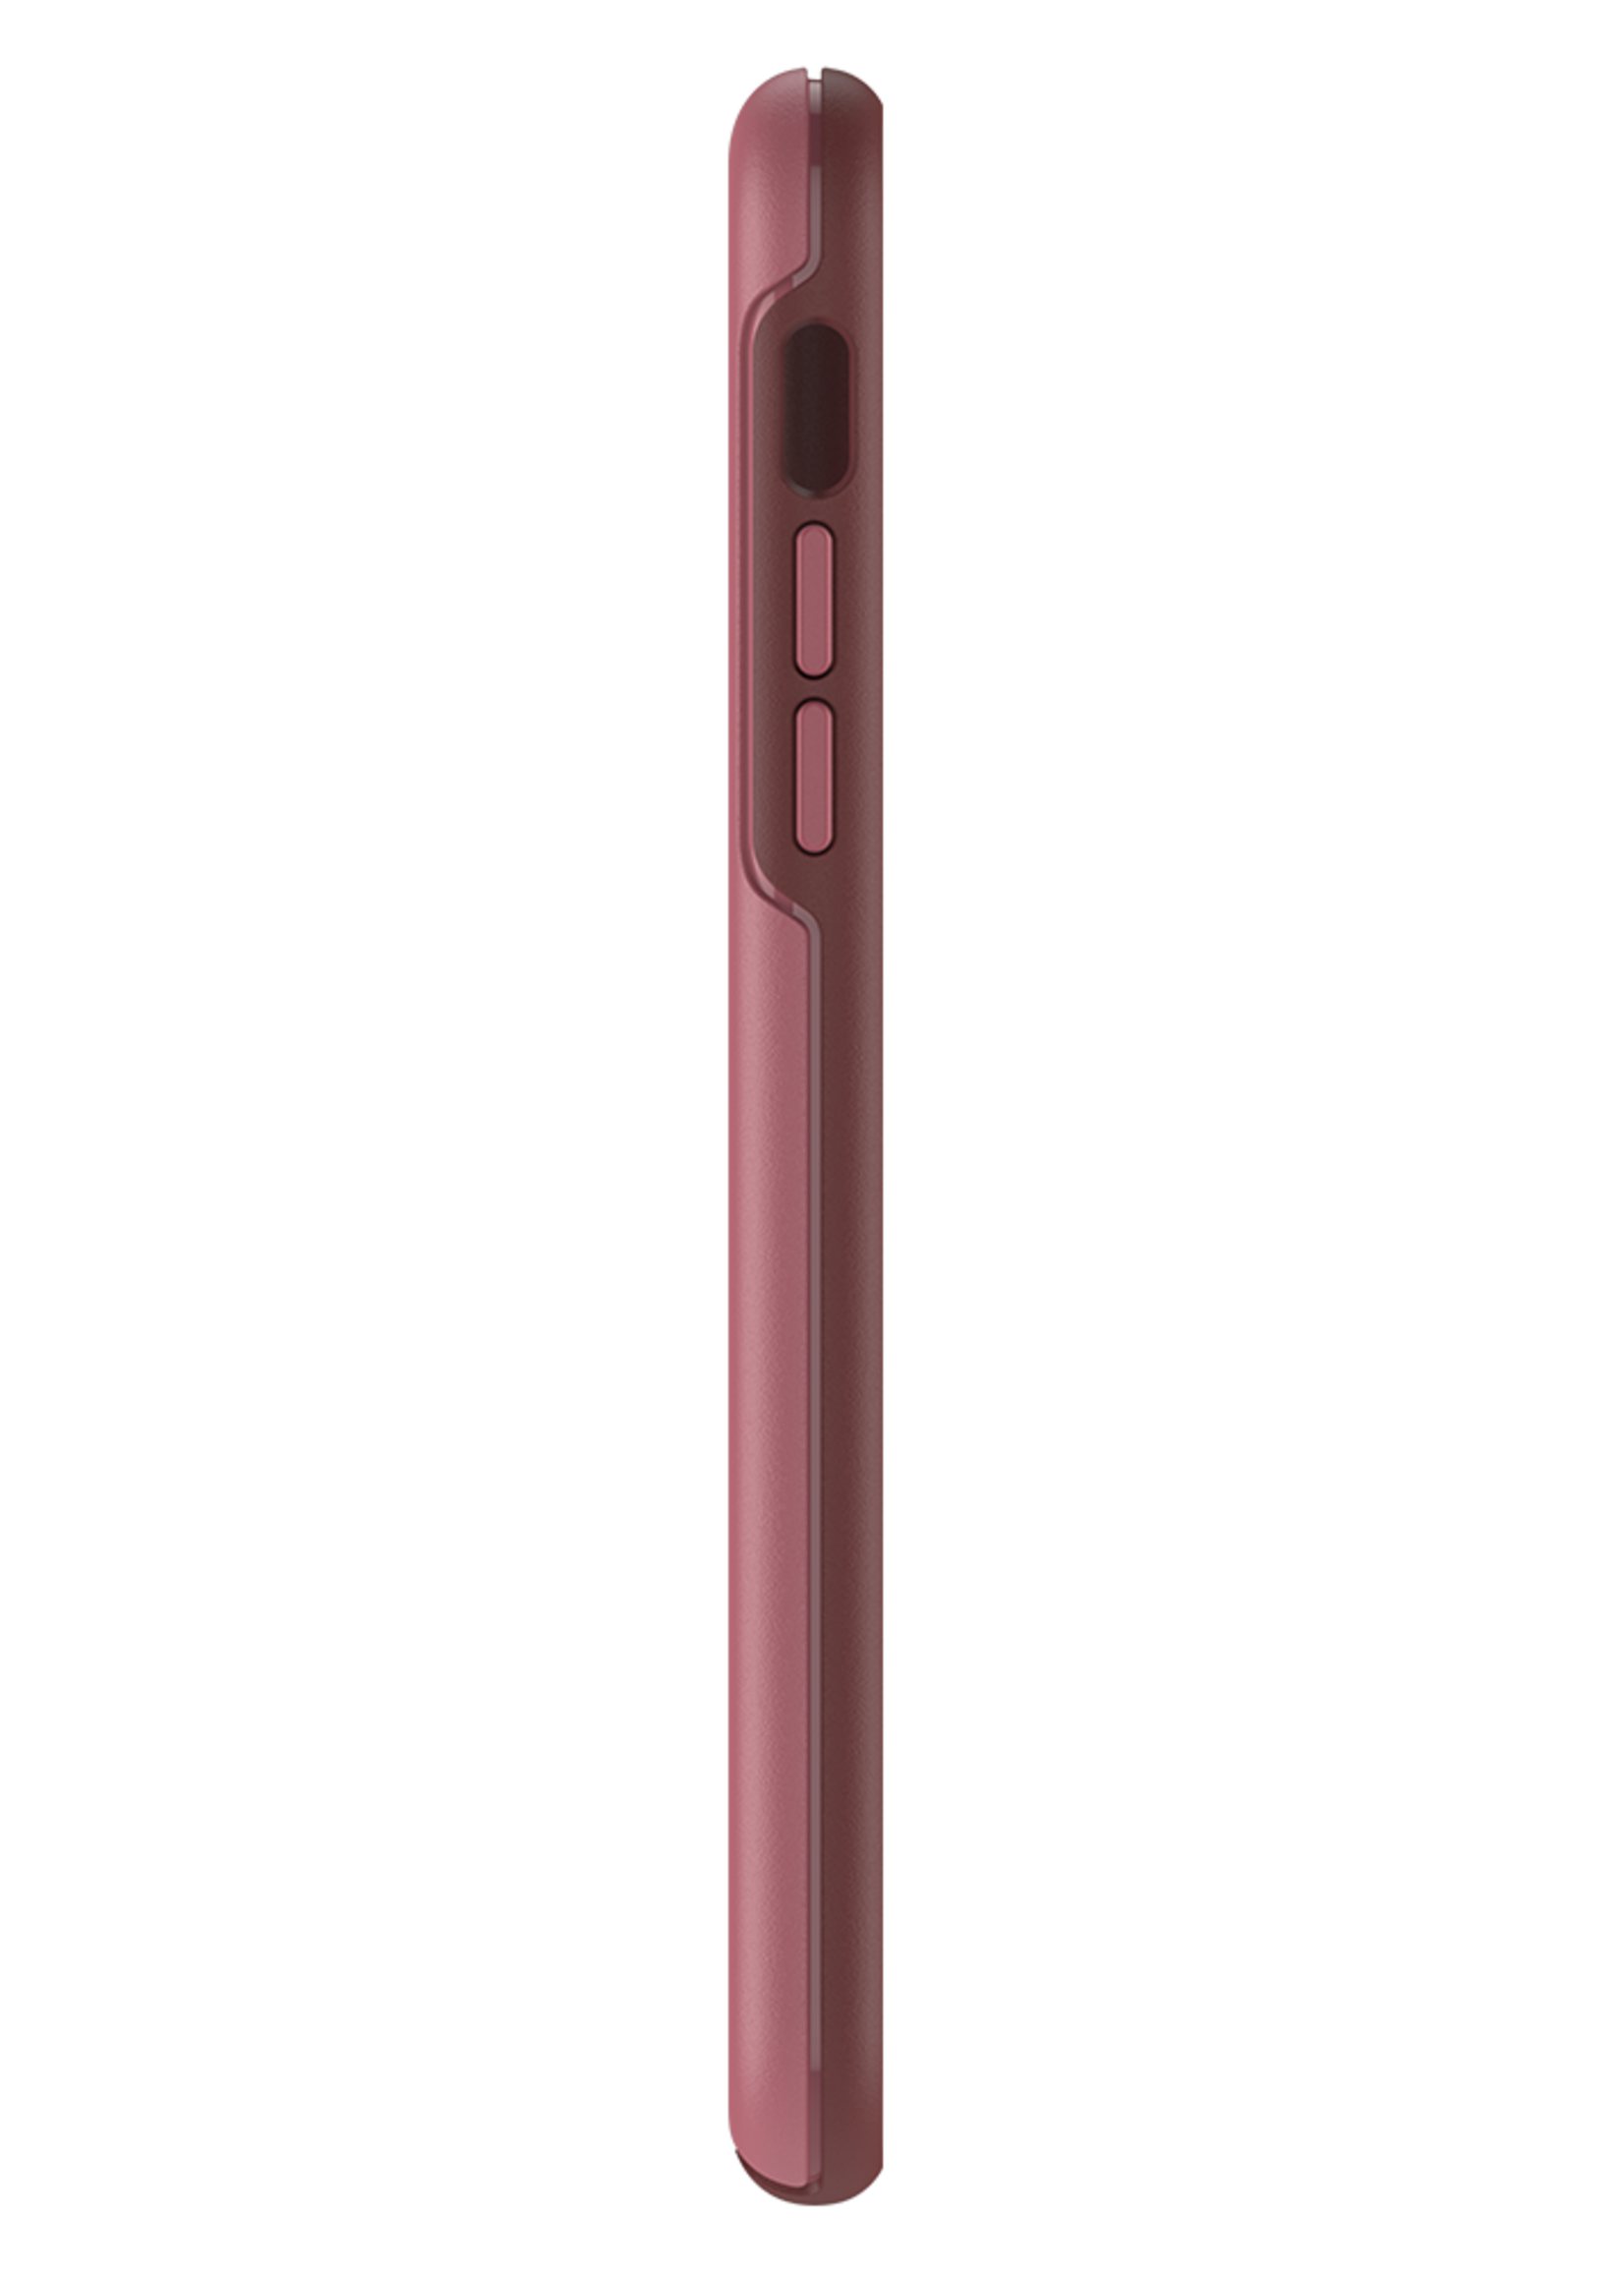 Otterbox OtterBox - Symmetry Case for Apple iPhone 11 Pro Max - Beguiled Rose